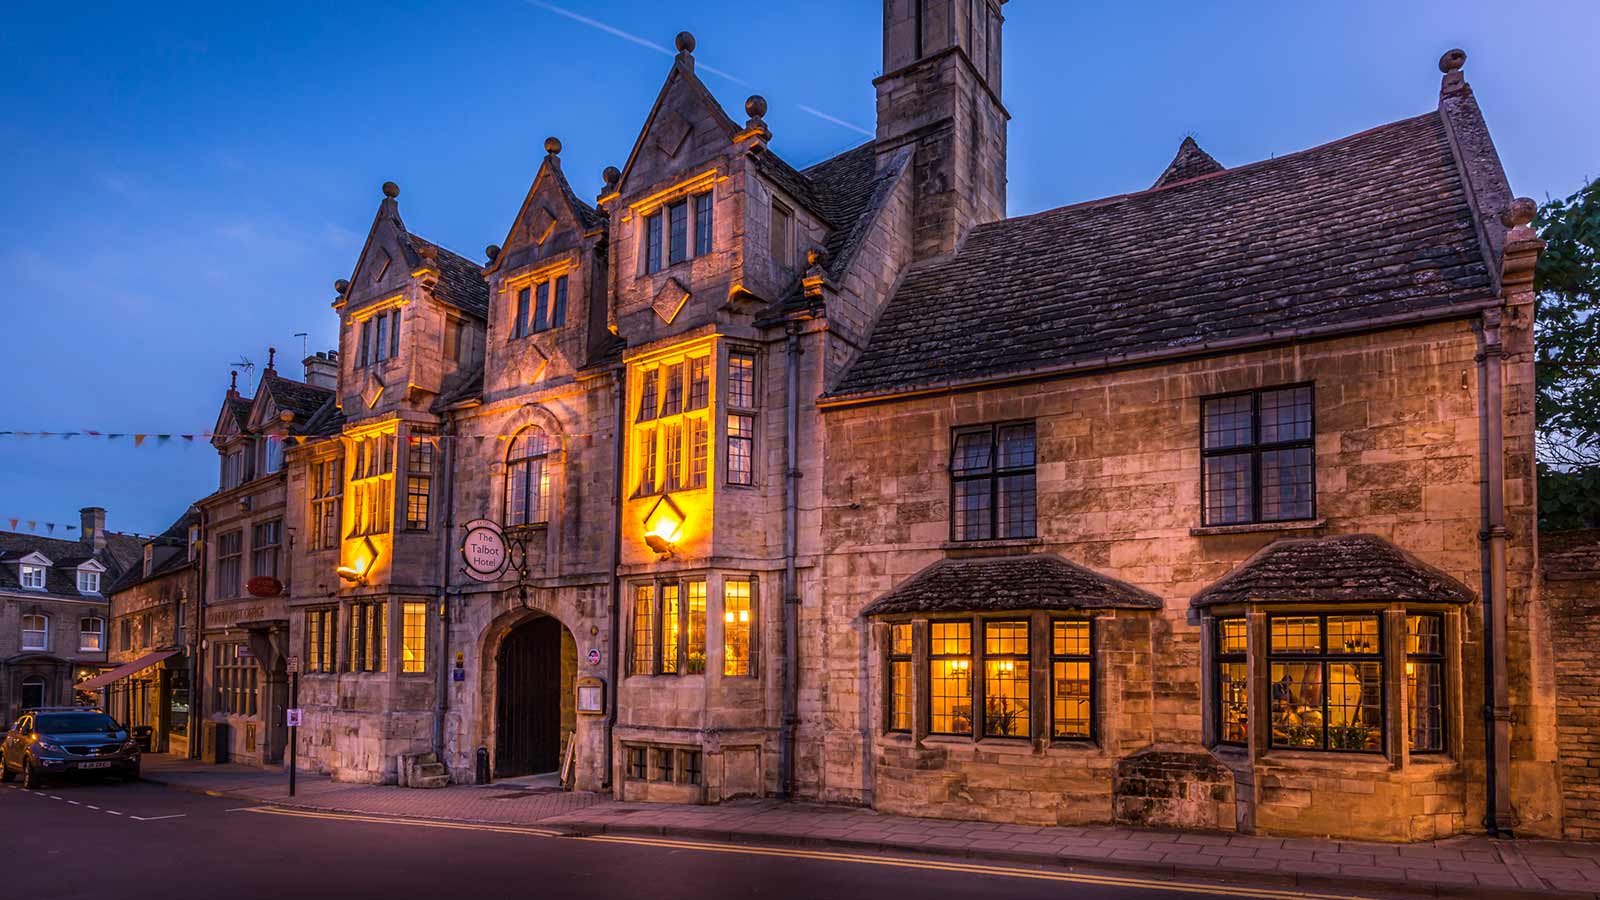 The Talbot Hotel, Eatery and Coffee House - Oundle, Northamptonshire